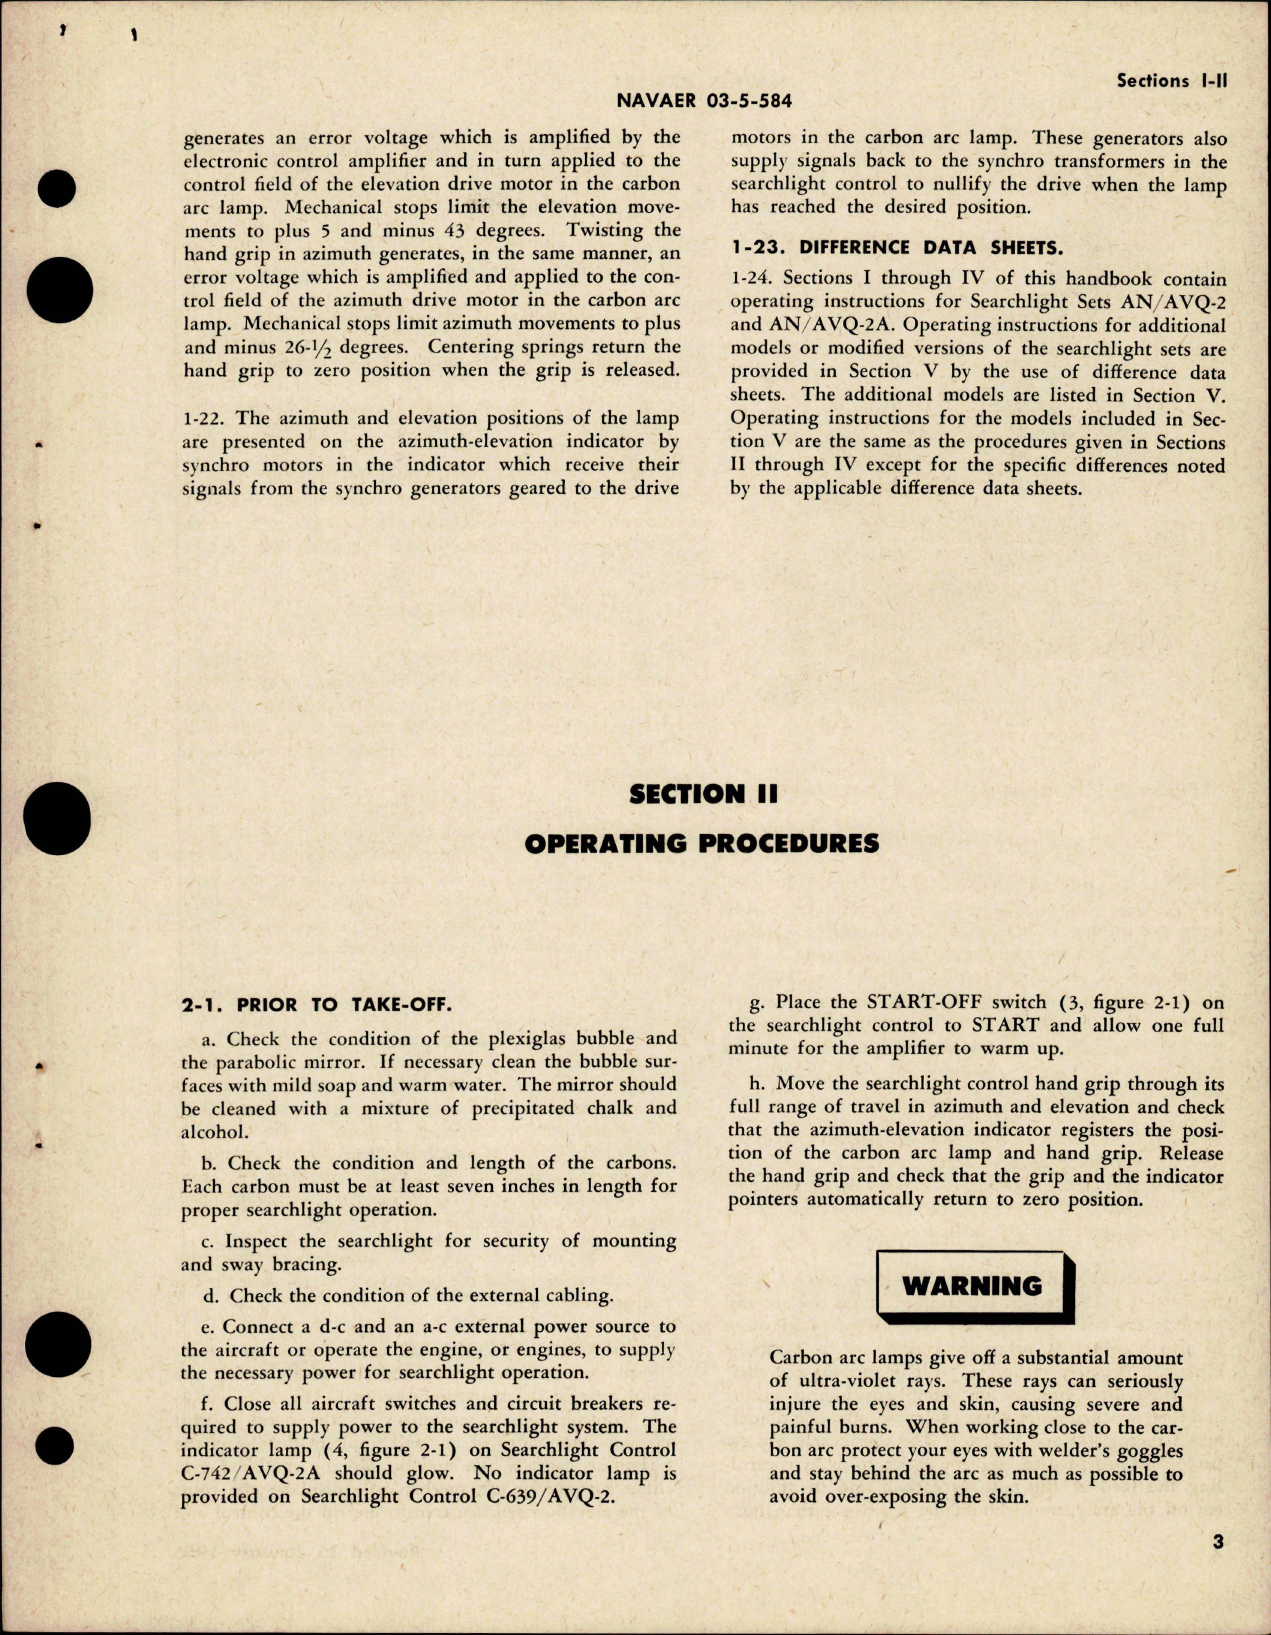 Sample page 7 from AirCorps Library document: Operation Instructions for Aircraft Searchlight Sets - AN-AVQ-2 and AN-AVQ-2A - Installations in AF-2S, P2V-5, AD-4N, AD-5N, and S2F